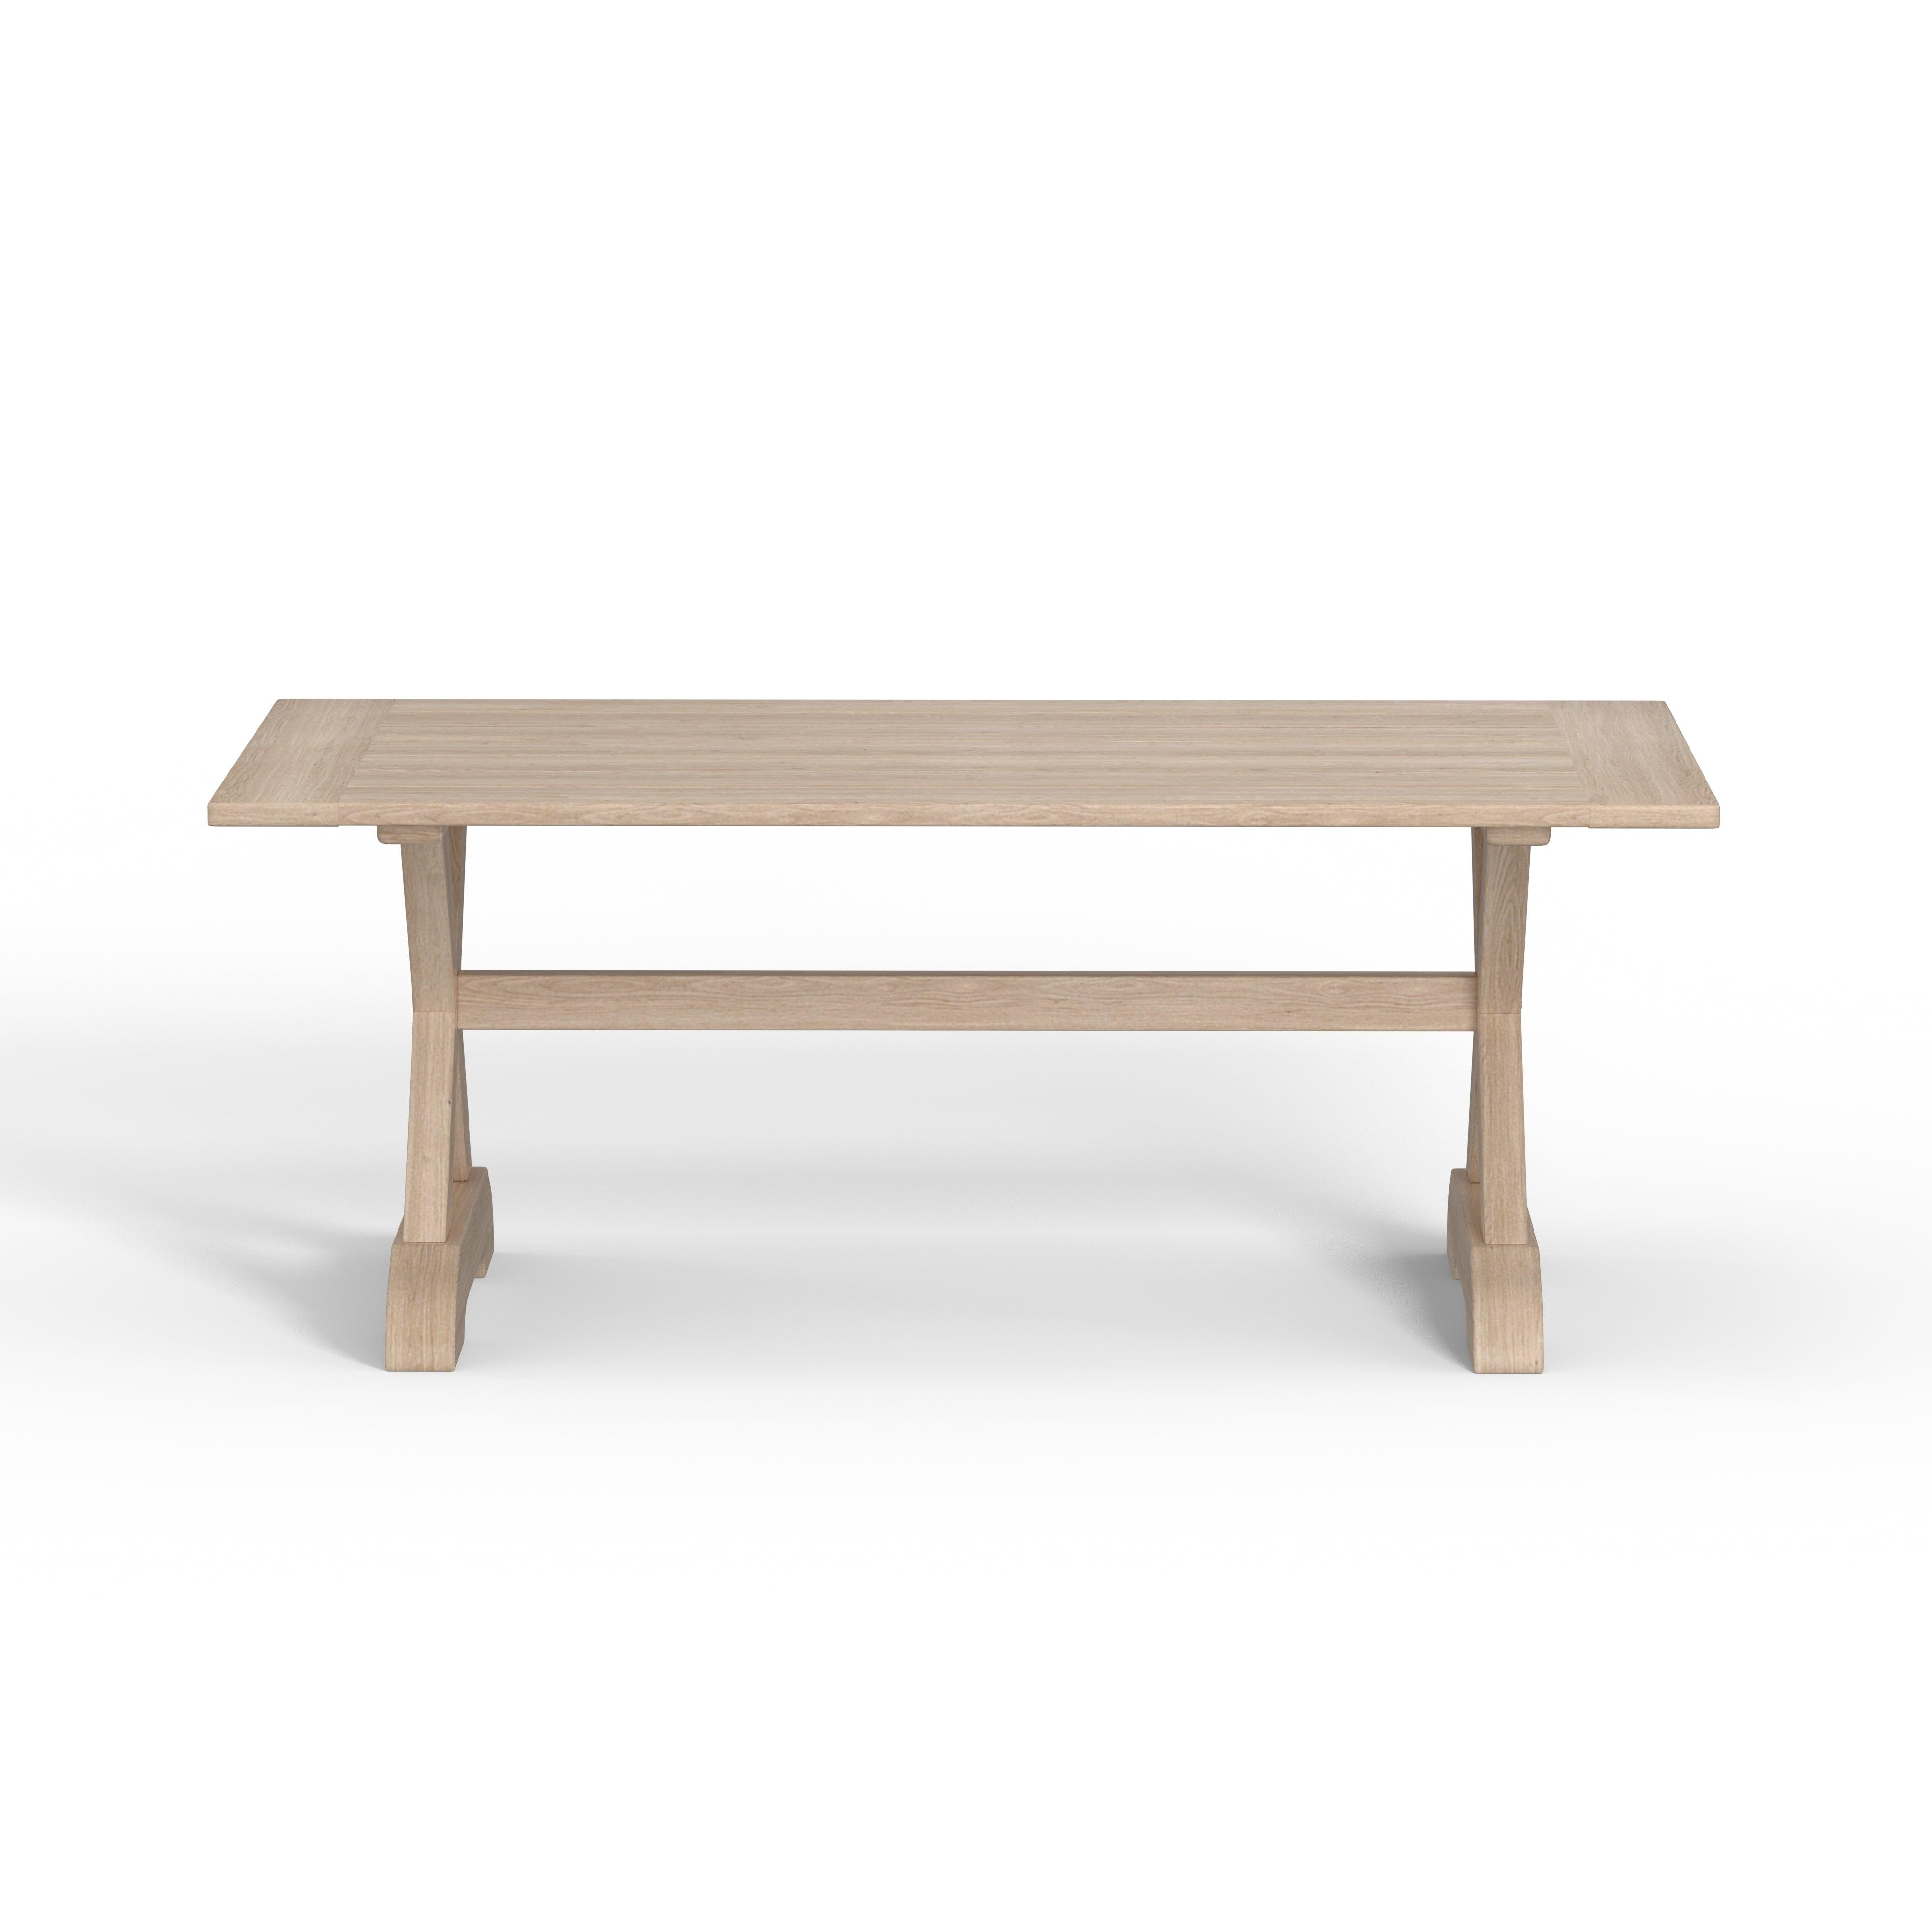 Outdoor Grey Teak Patio Table from Harbor Classic